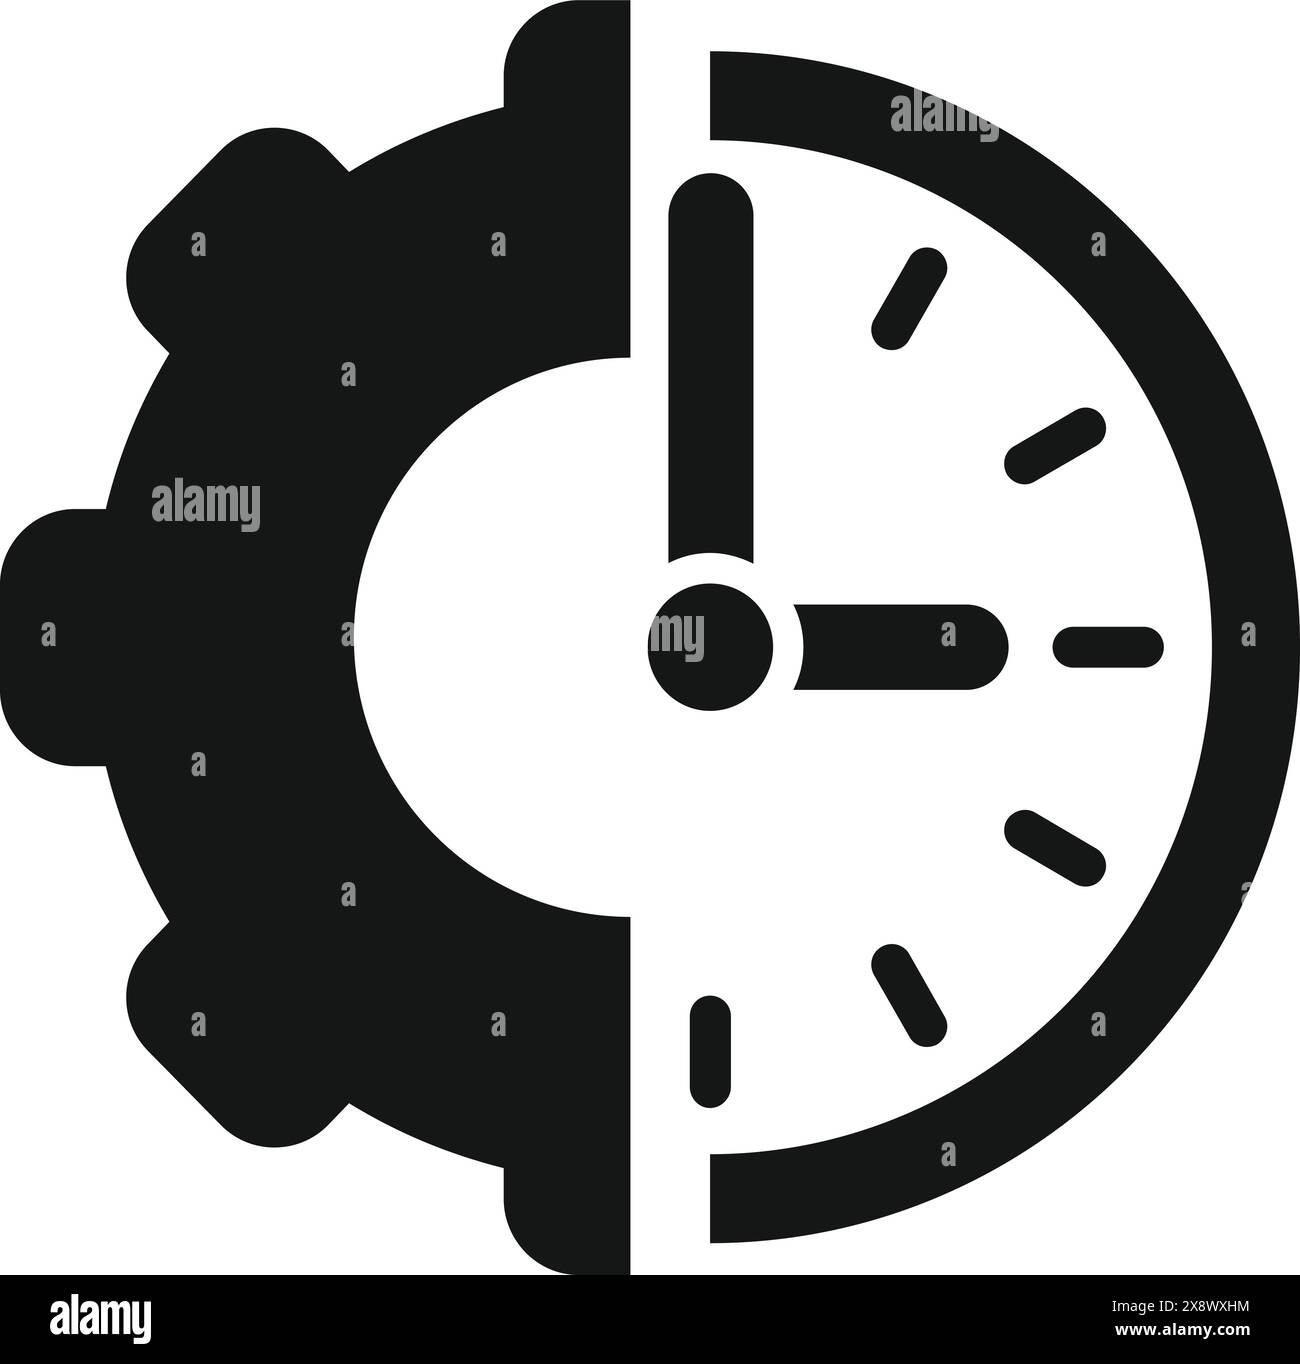 Abstract speed concept icon with time, clock, gear, and vector elements in black and white. This illustration symbolizes efficiency, productivity, motion, deadline, urgency, and technology Stock Vector